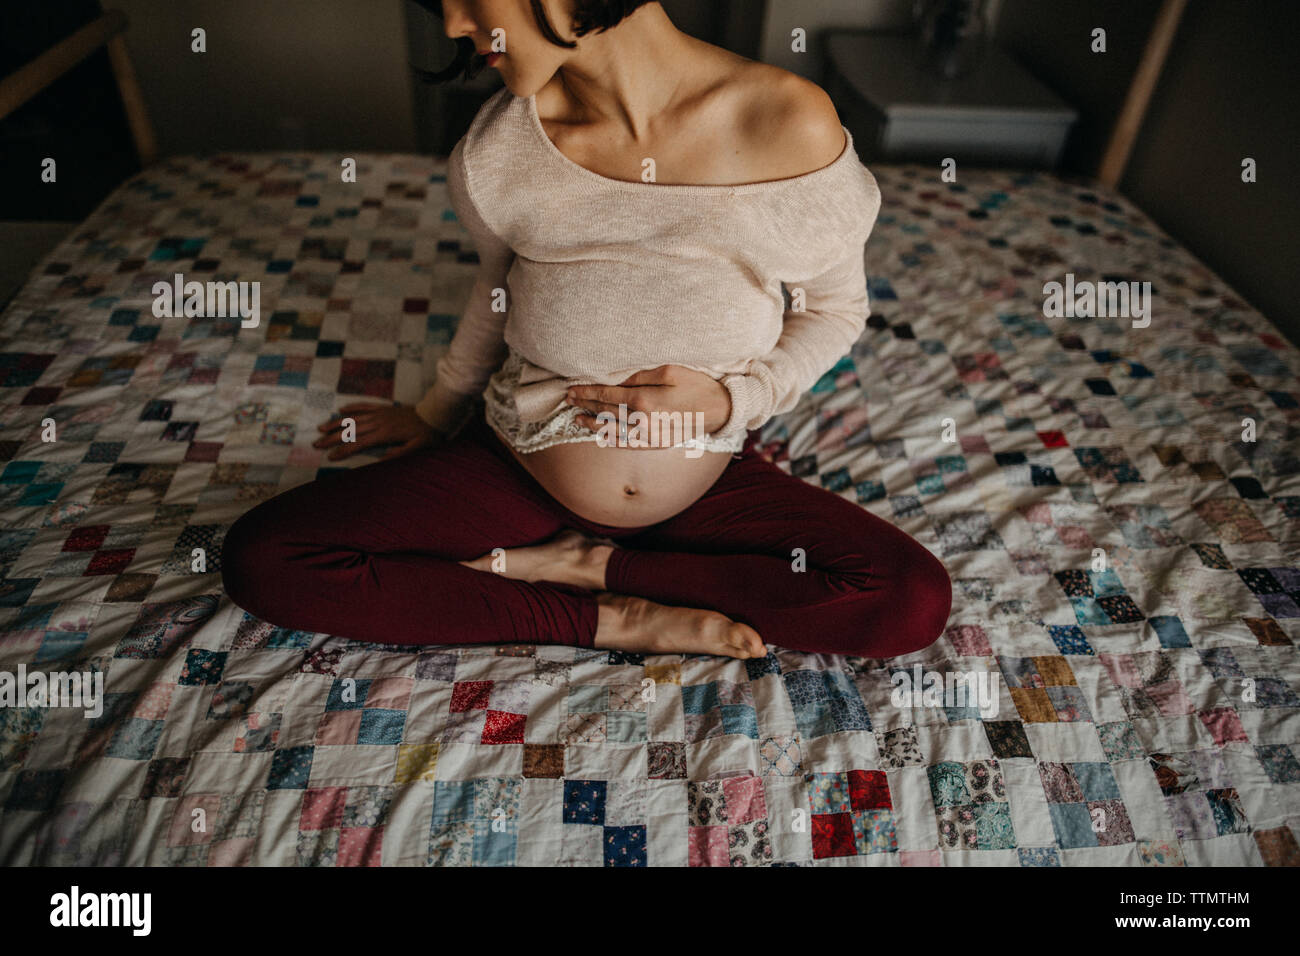 Young pregnant woman sitting in bed holding her baby bump Stock Photo